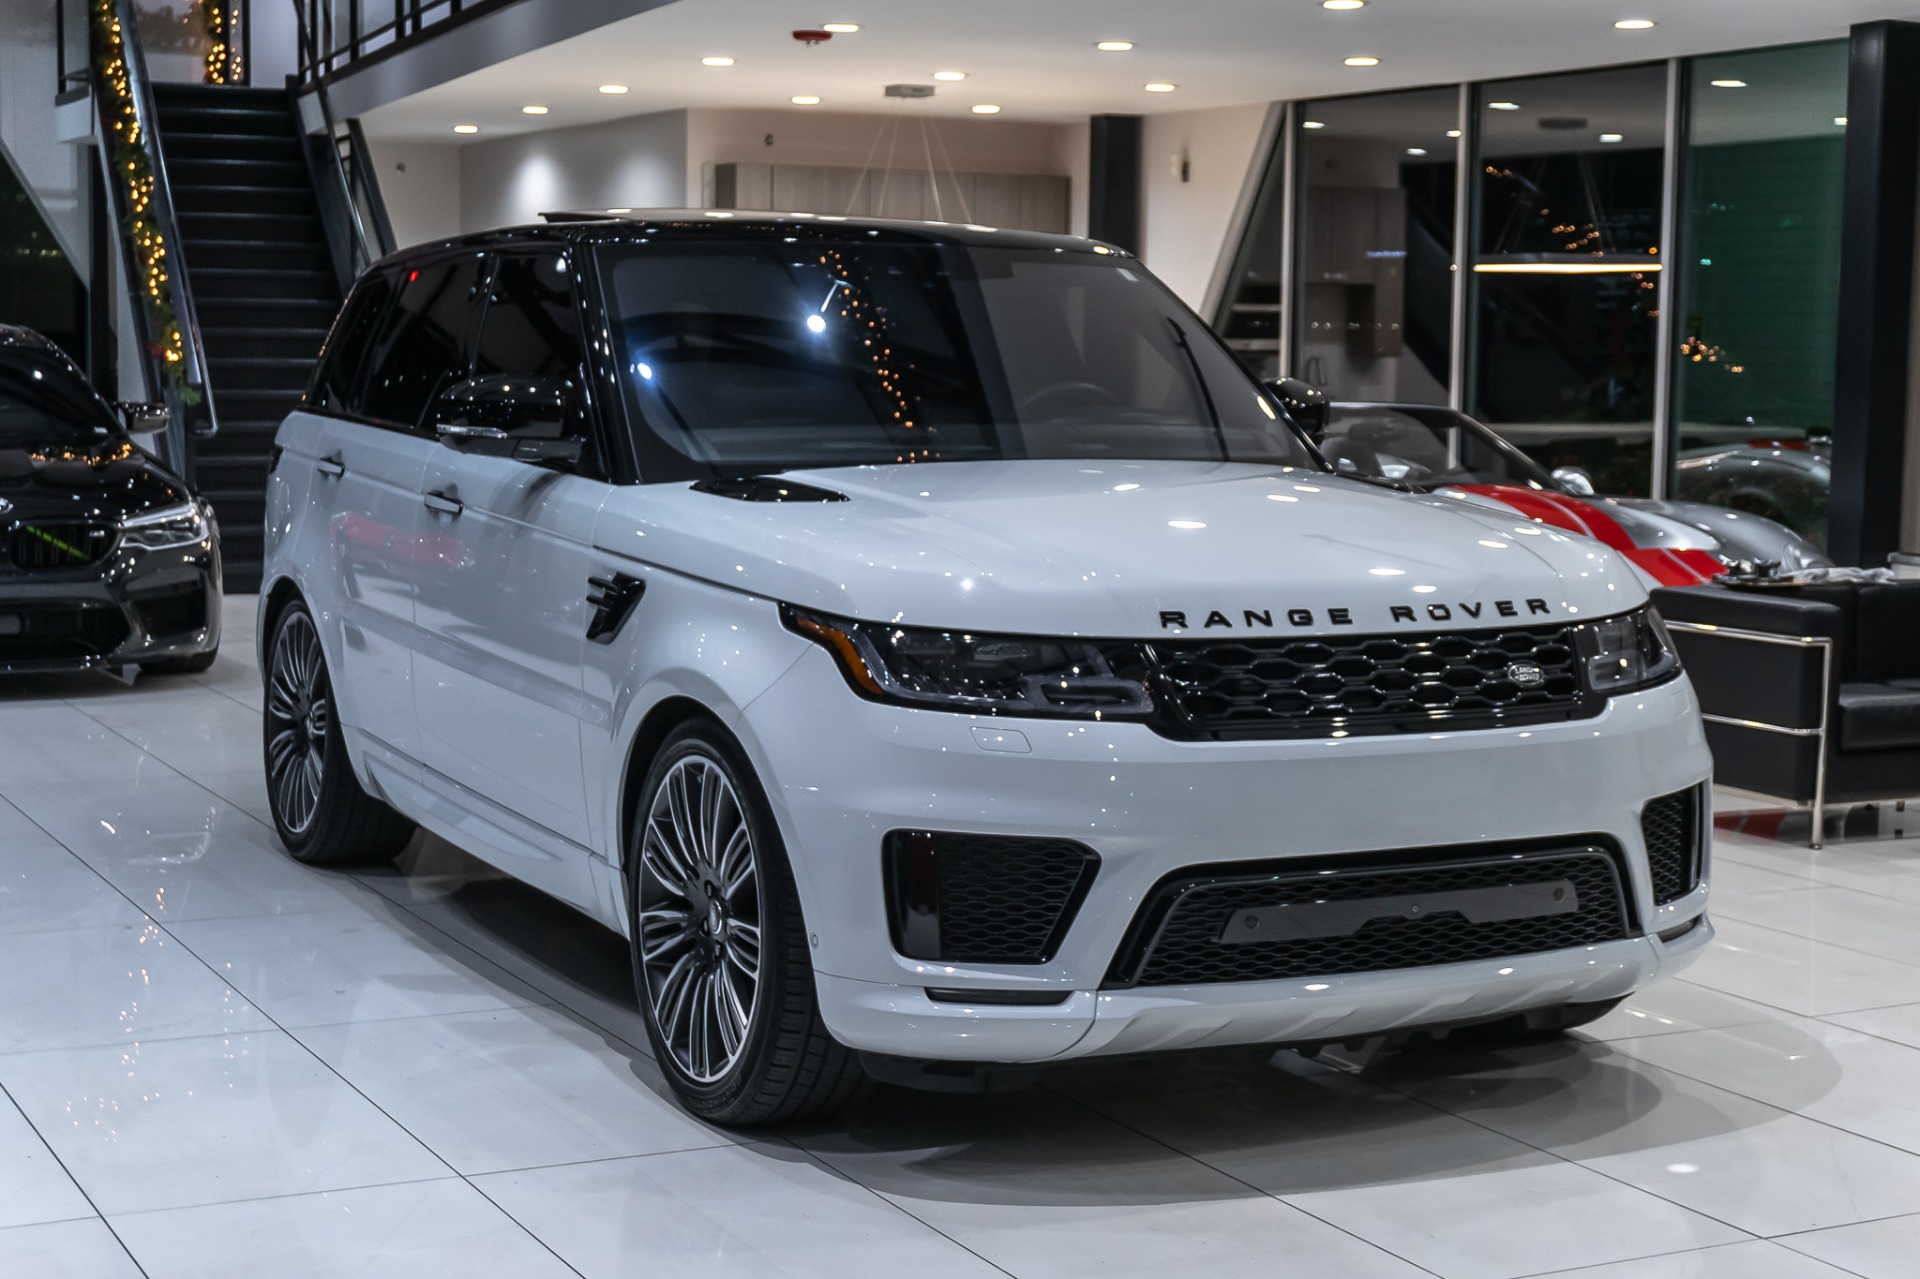 Used-2019-Land-Rover-Range-Rover-Sport-Autobiography-SUV-DRIVER-ASSIST-CLIMATE-CONTROL-LOADED